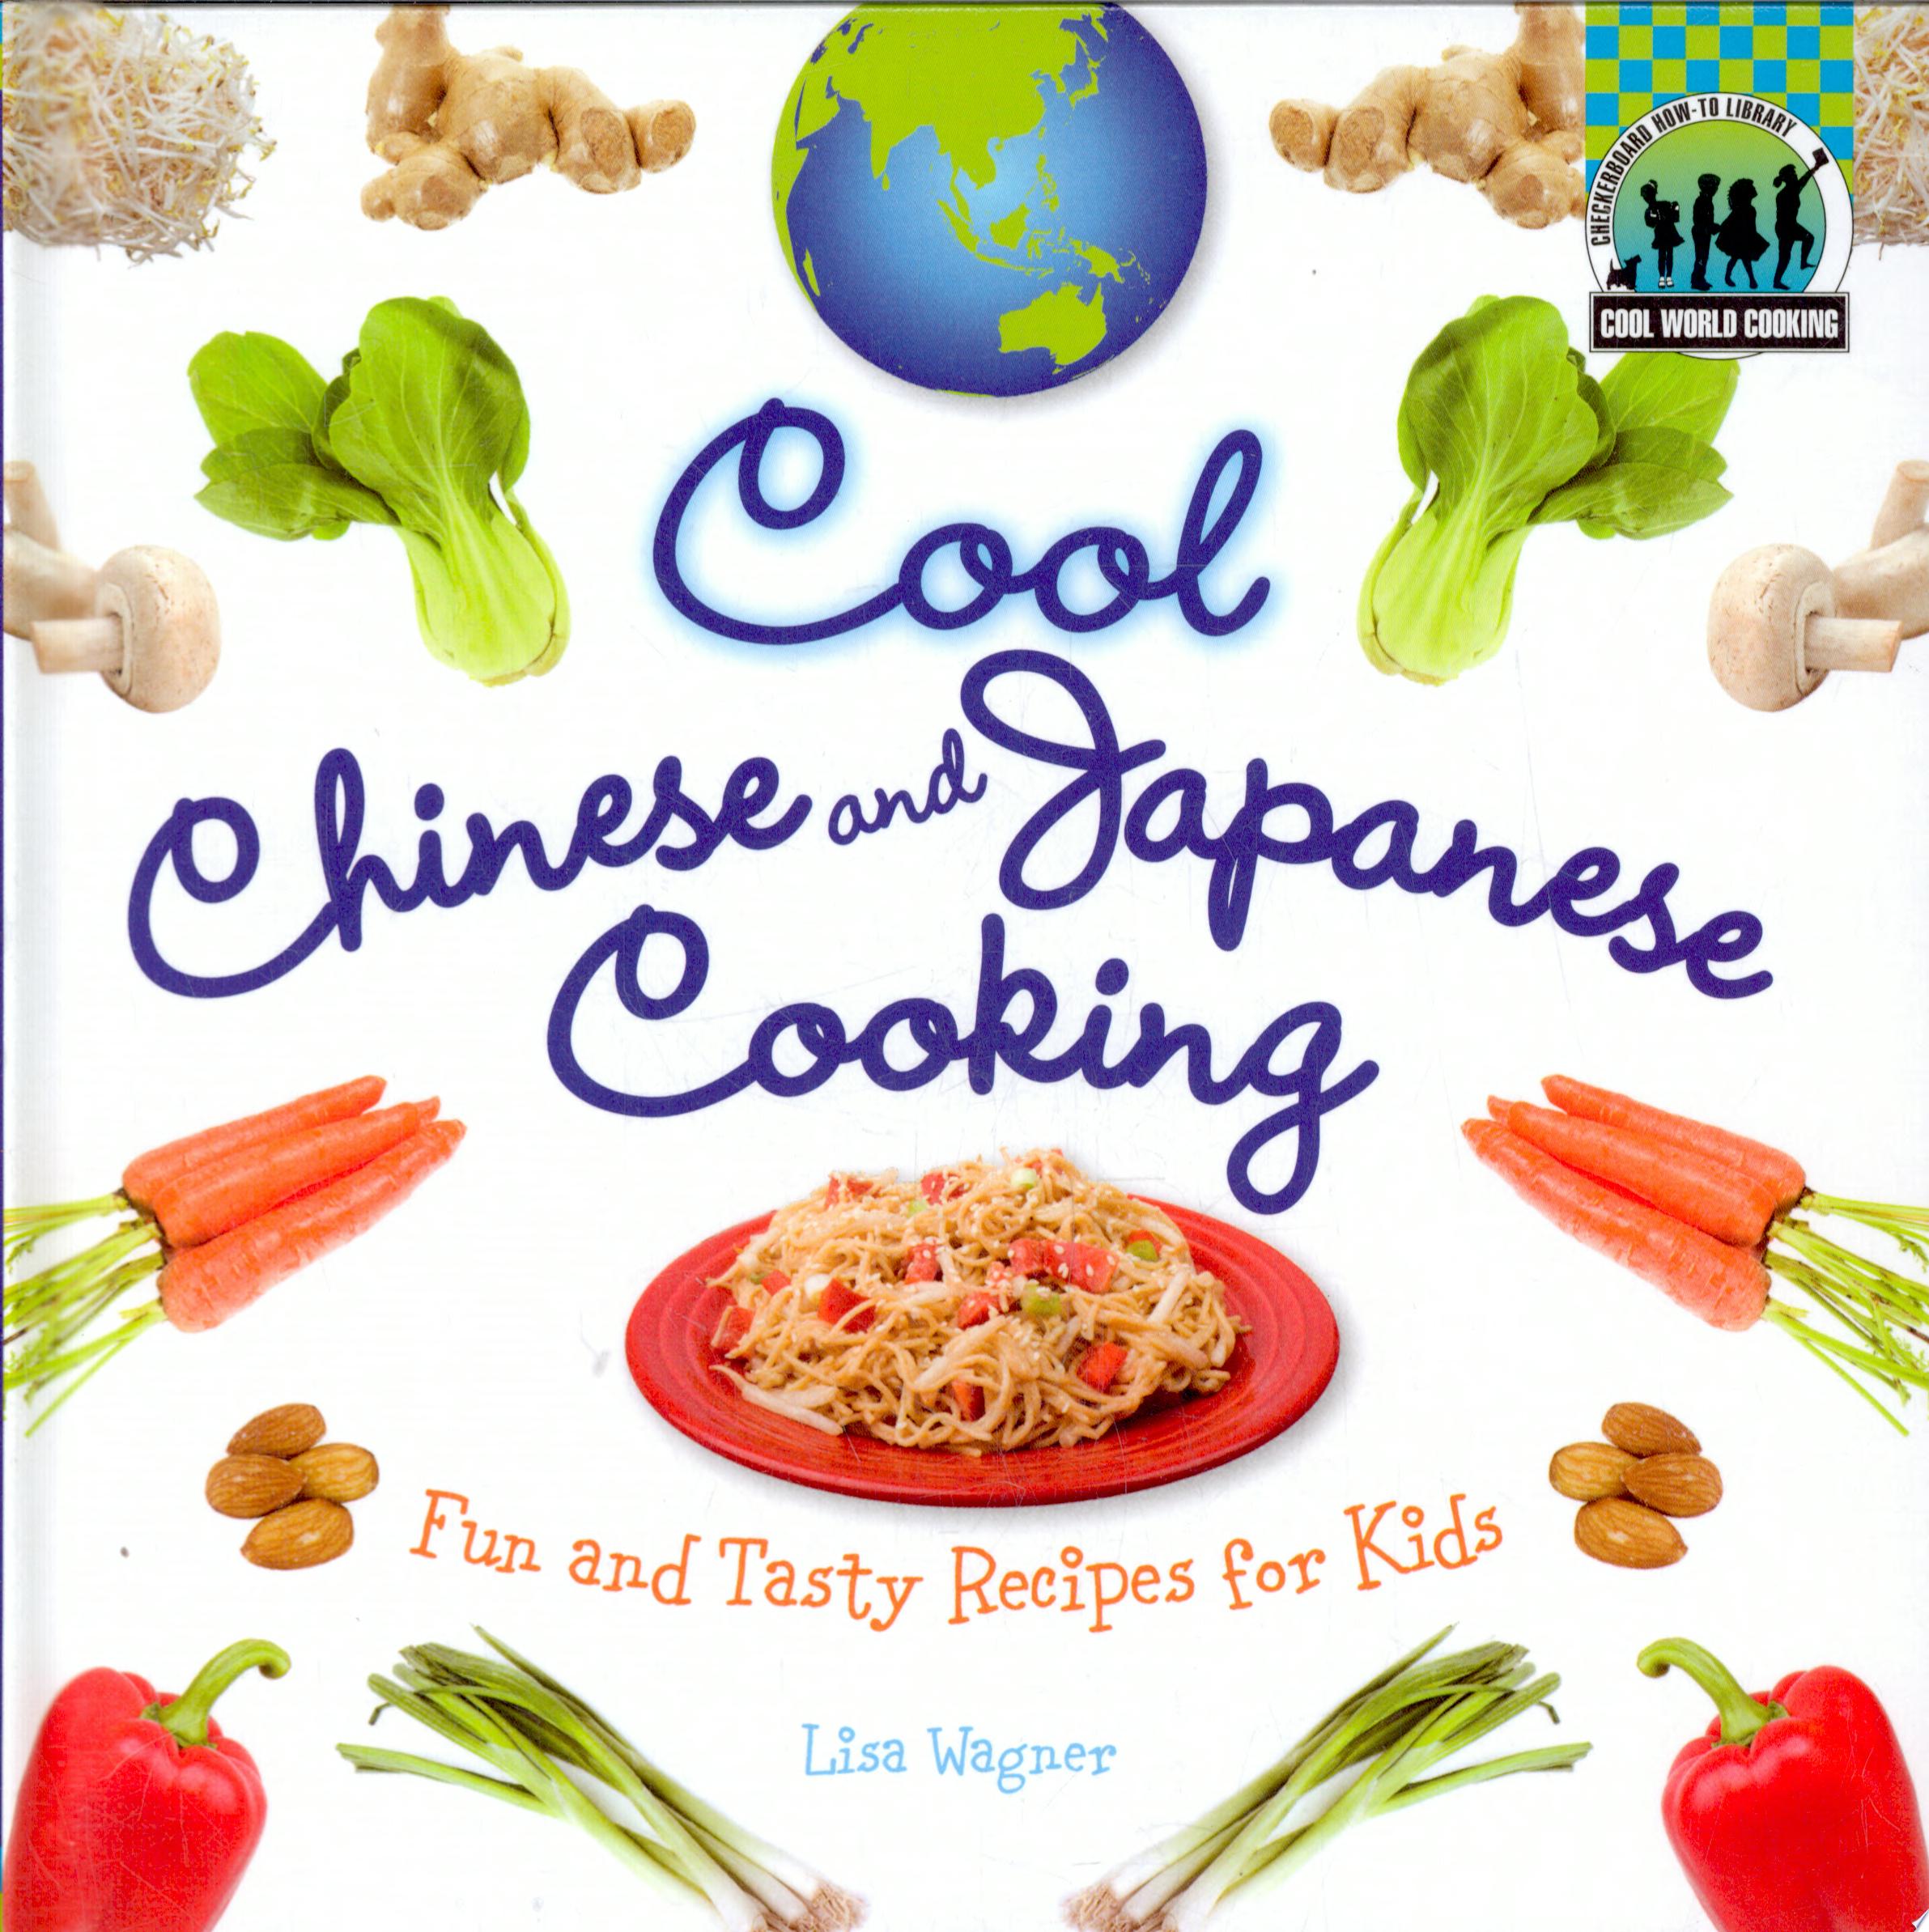 Image for "Cool Chinese and Japanese Cooking"